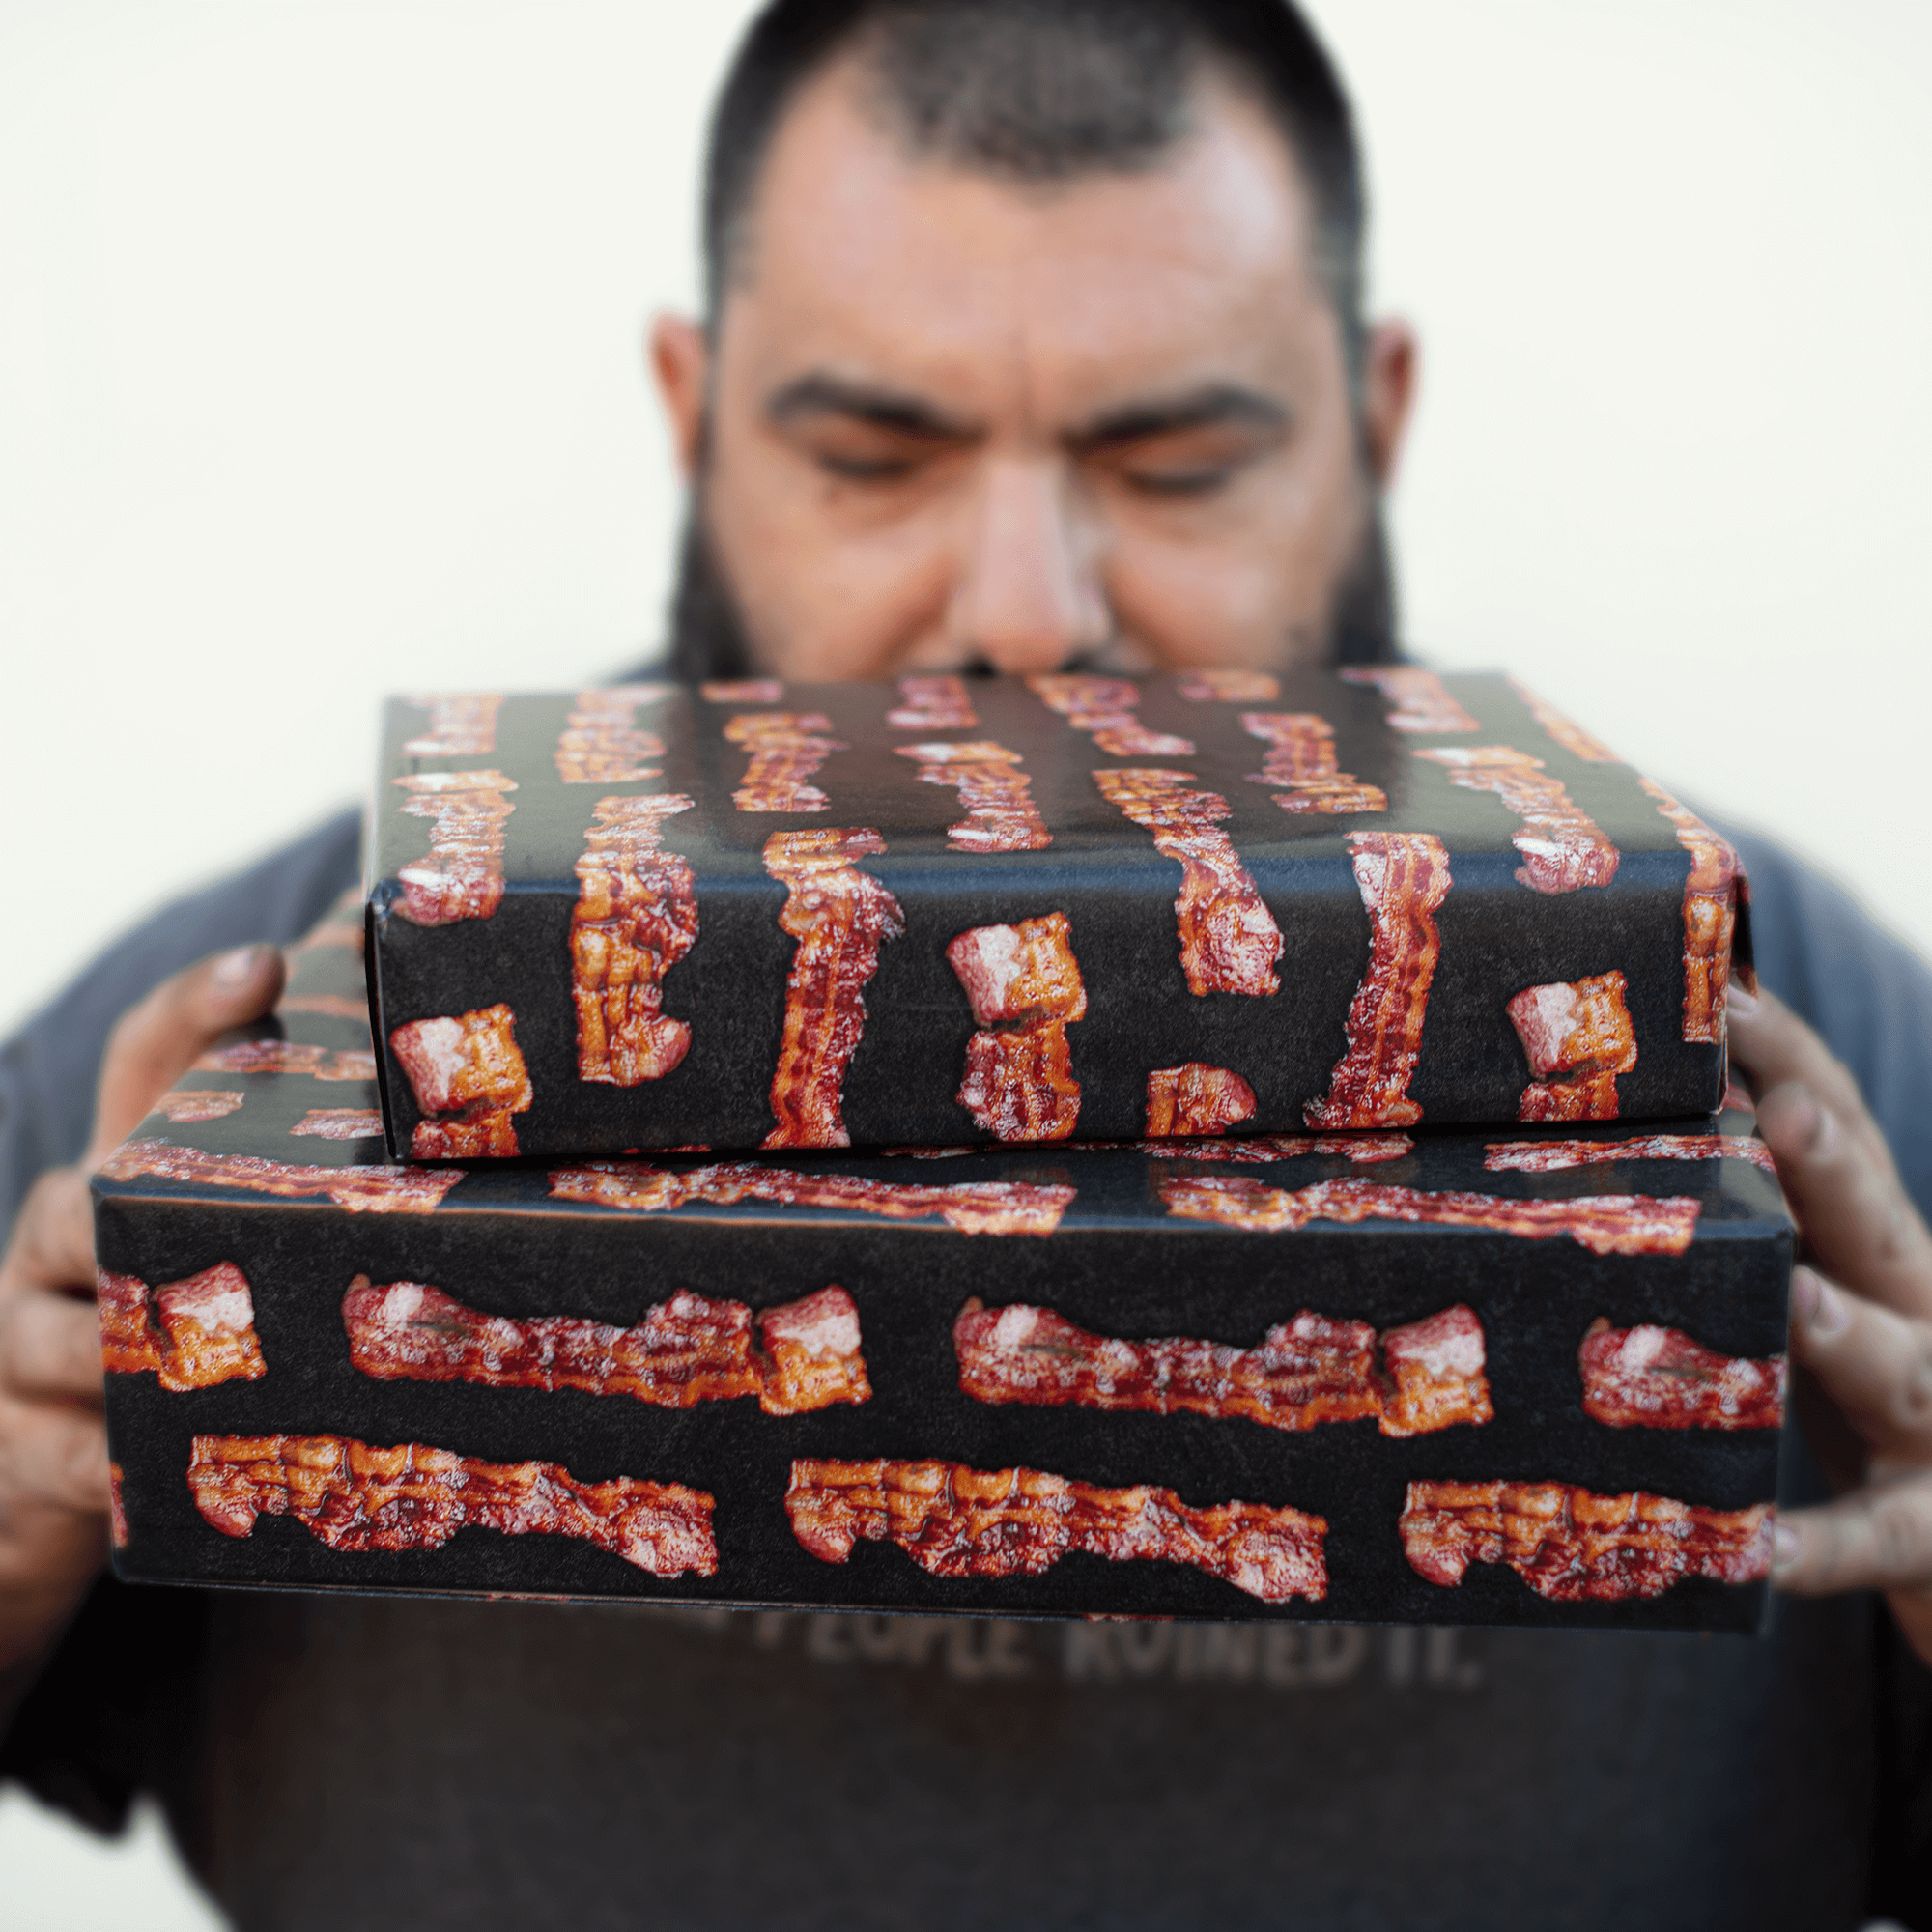 The Science of Smell: Why Bacon Scented Gift Wrapping Paper is So Irresistible